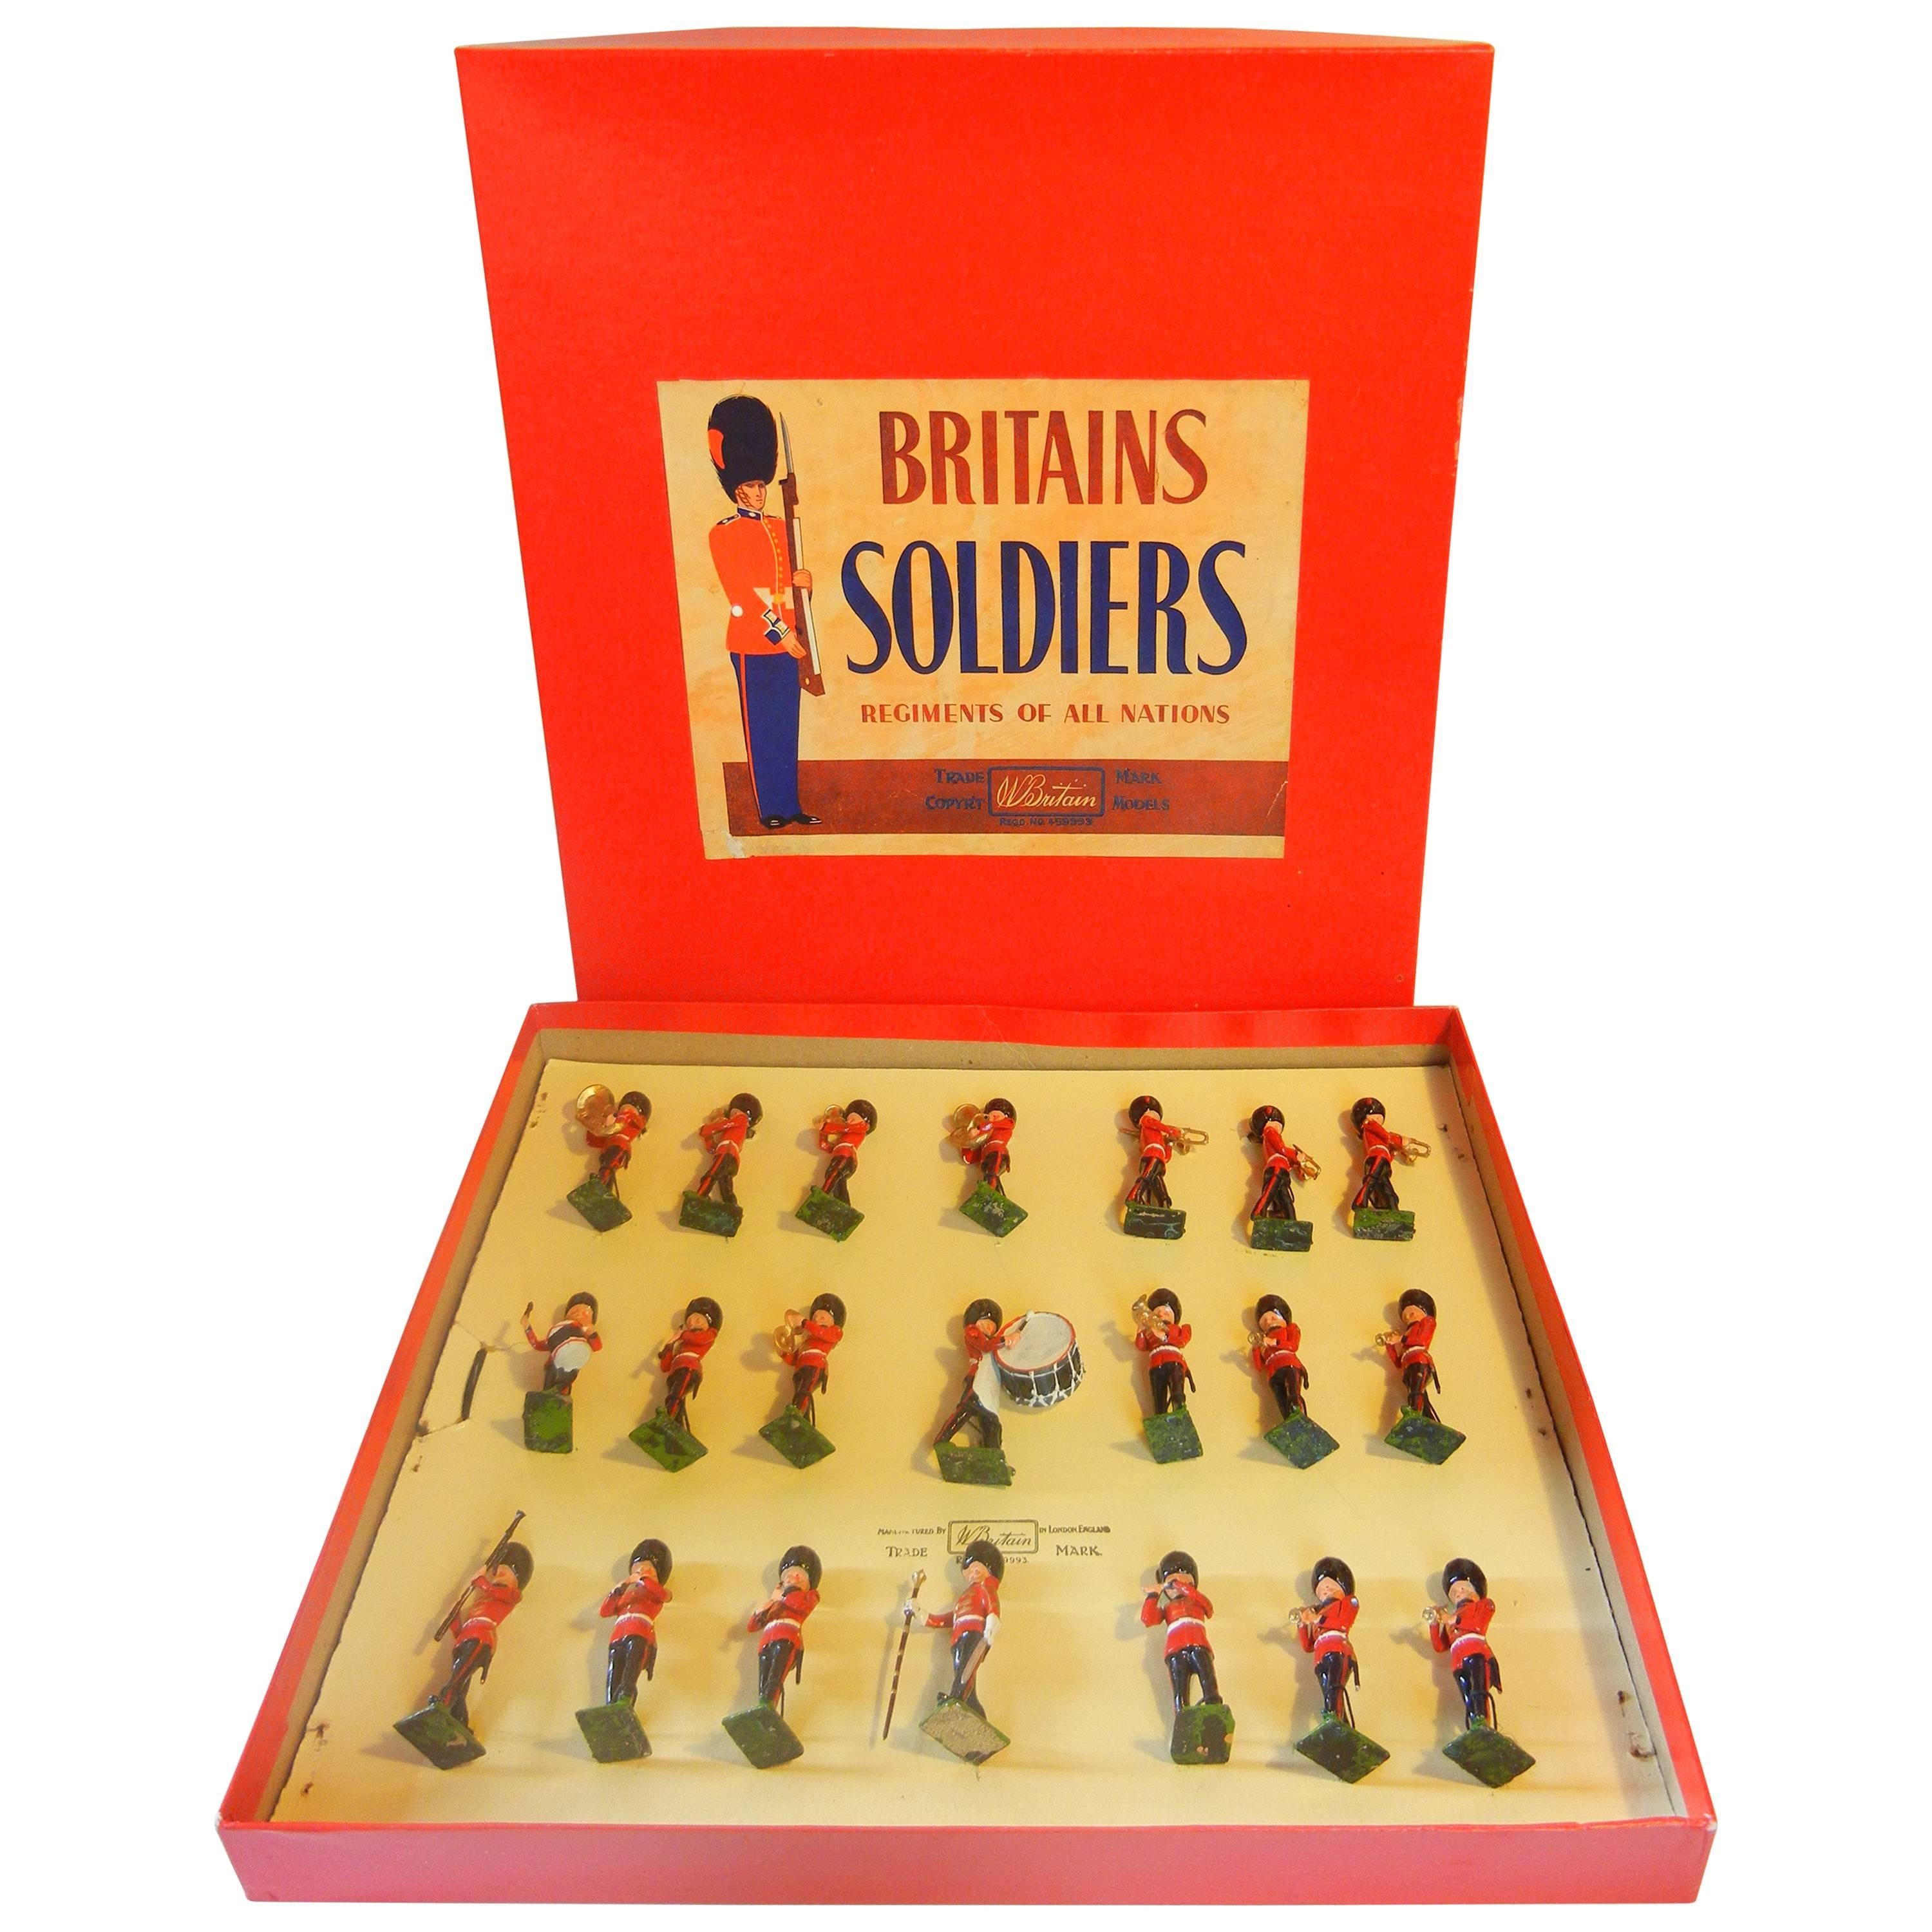 Full Band of the Coldstream Guards in Original Box, by Britains Ltd., UK, 1949